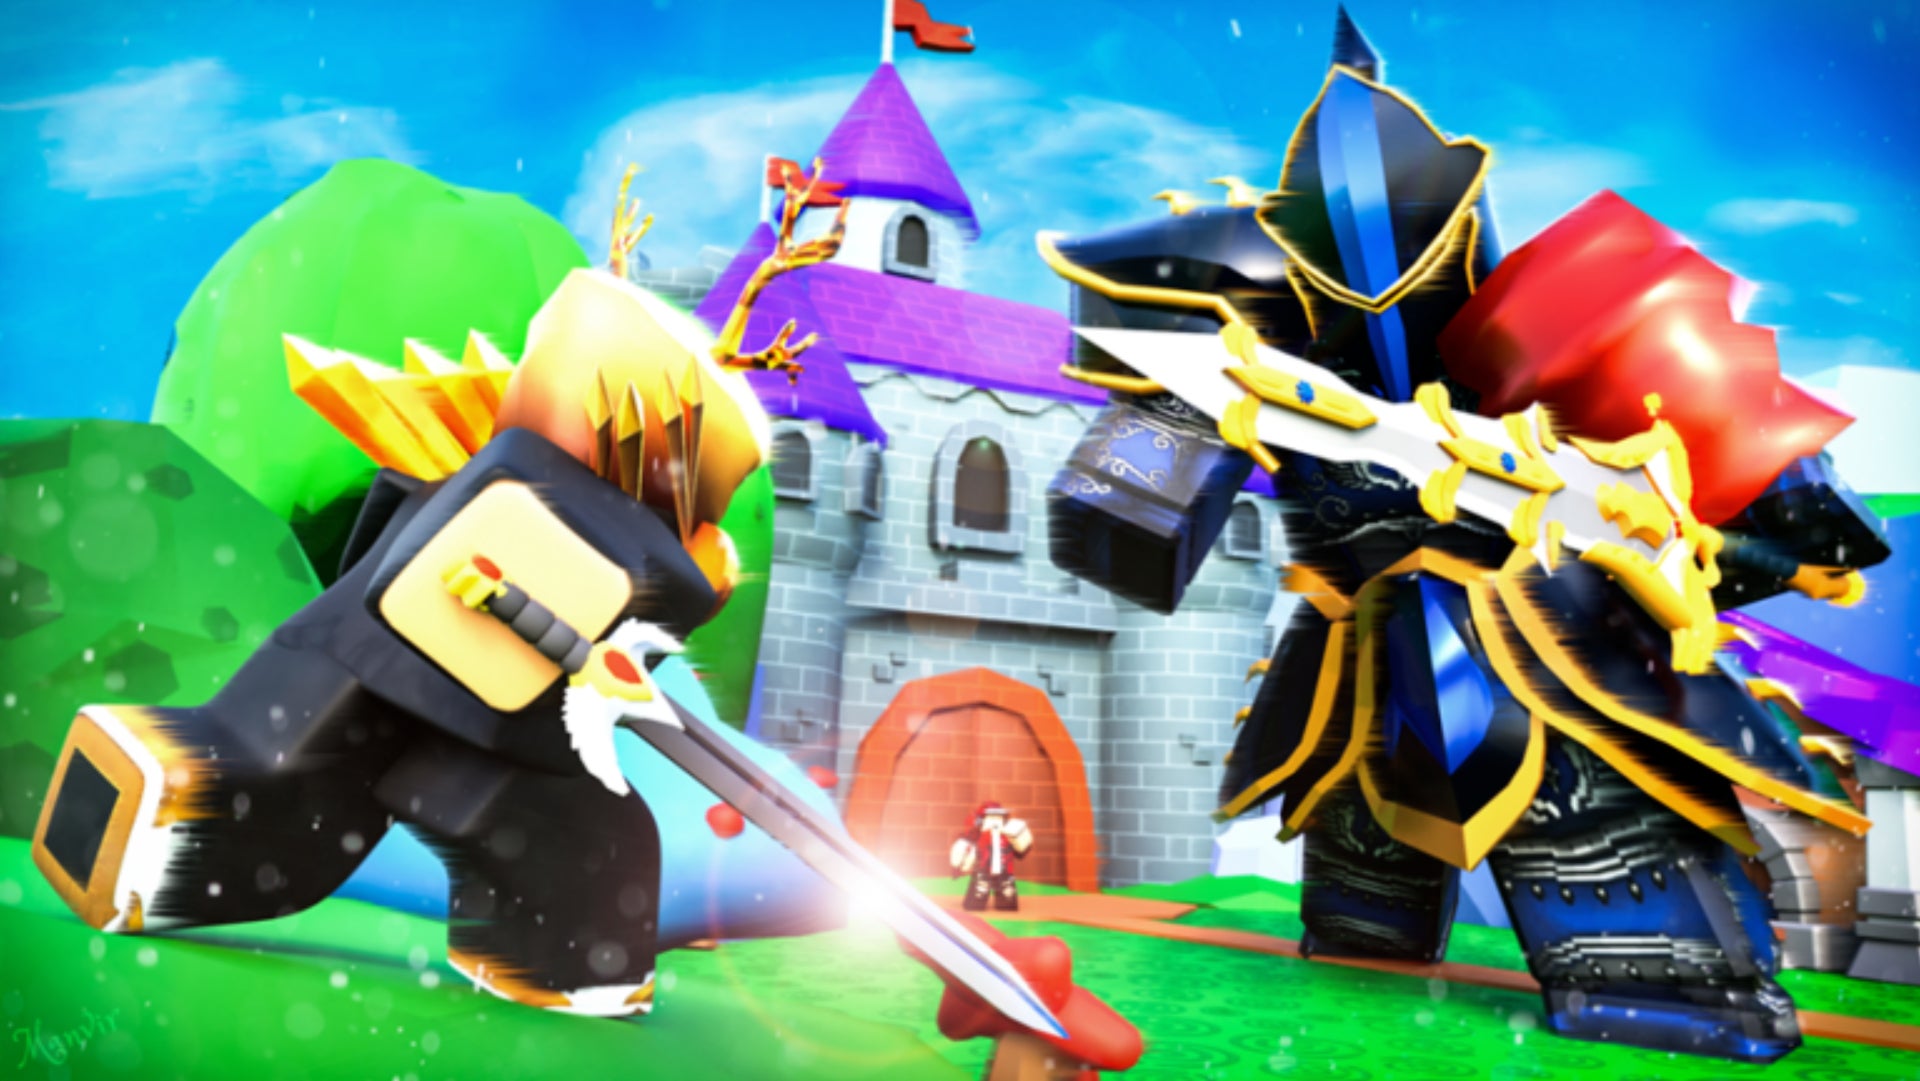 Official Sword Fighters Simulator artwork depicting a large Knight and a Hero holding swords as they battle each other.